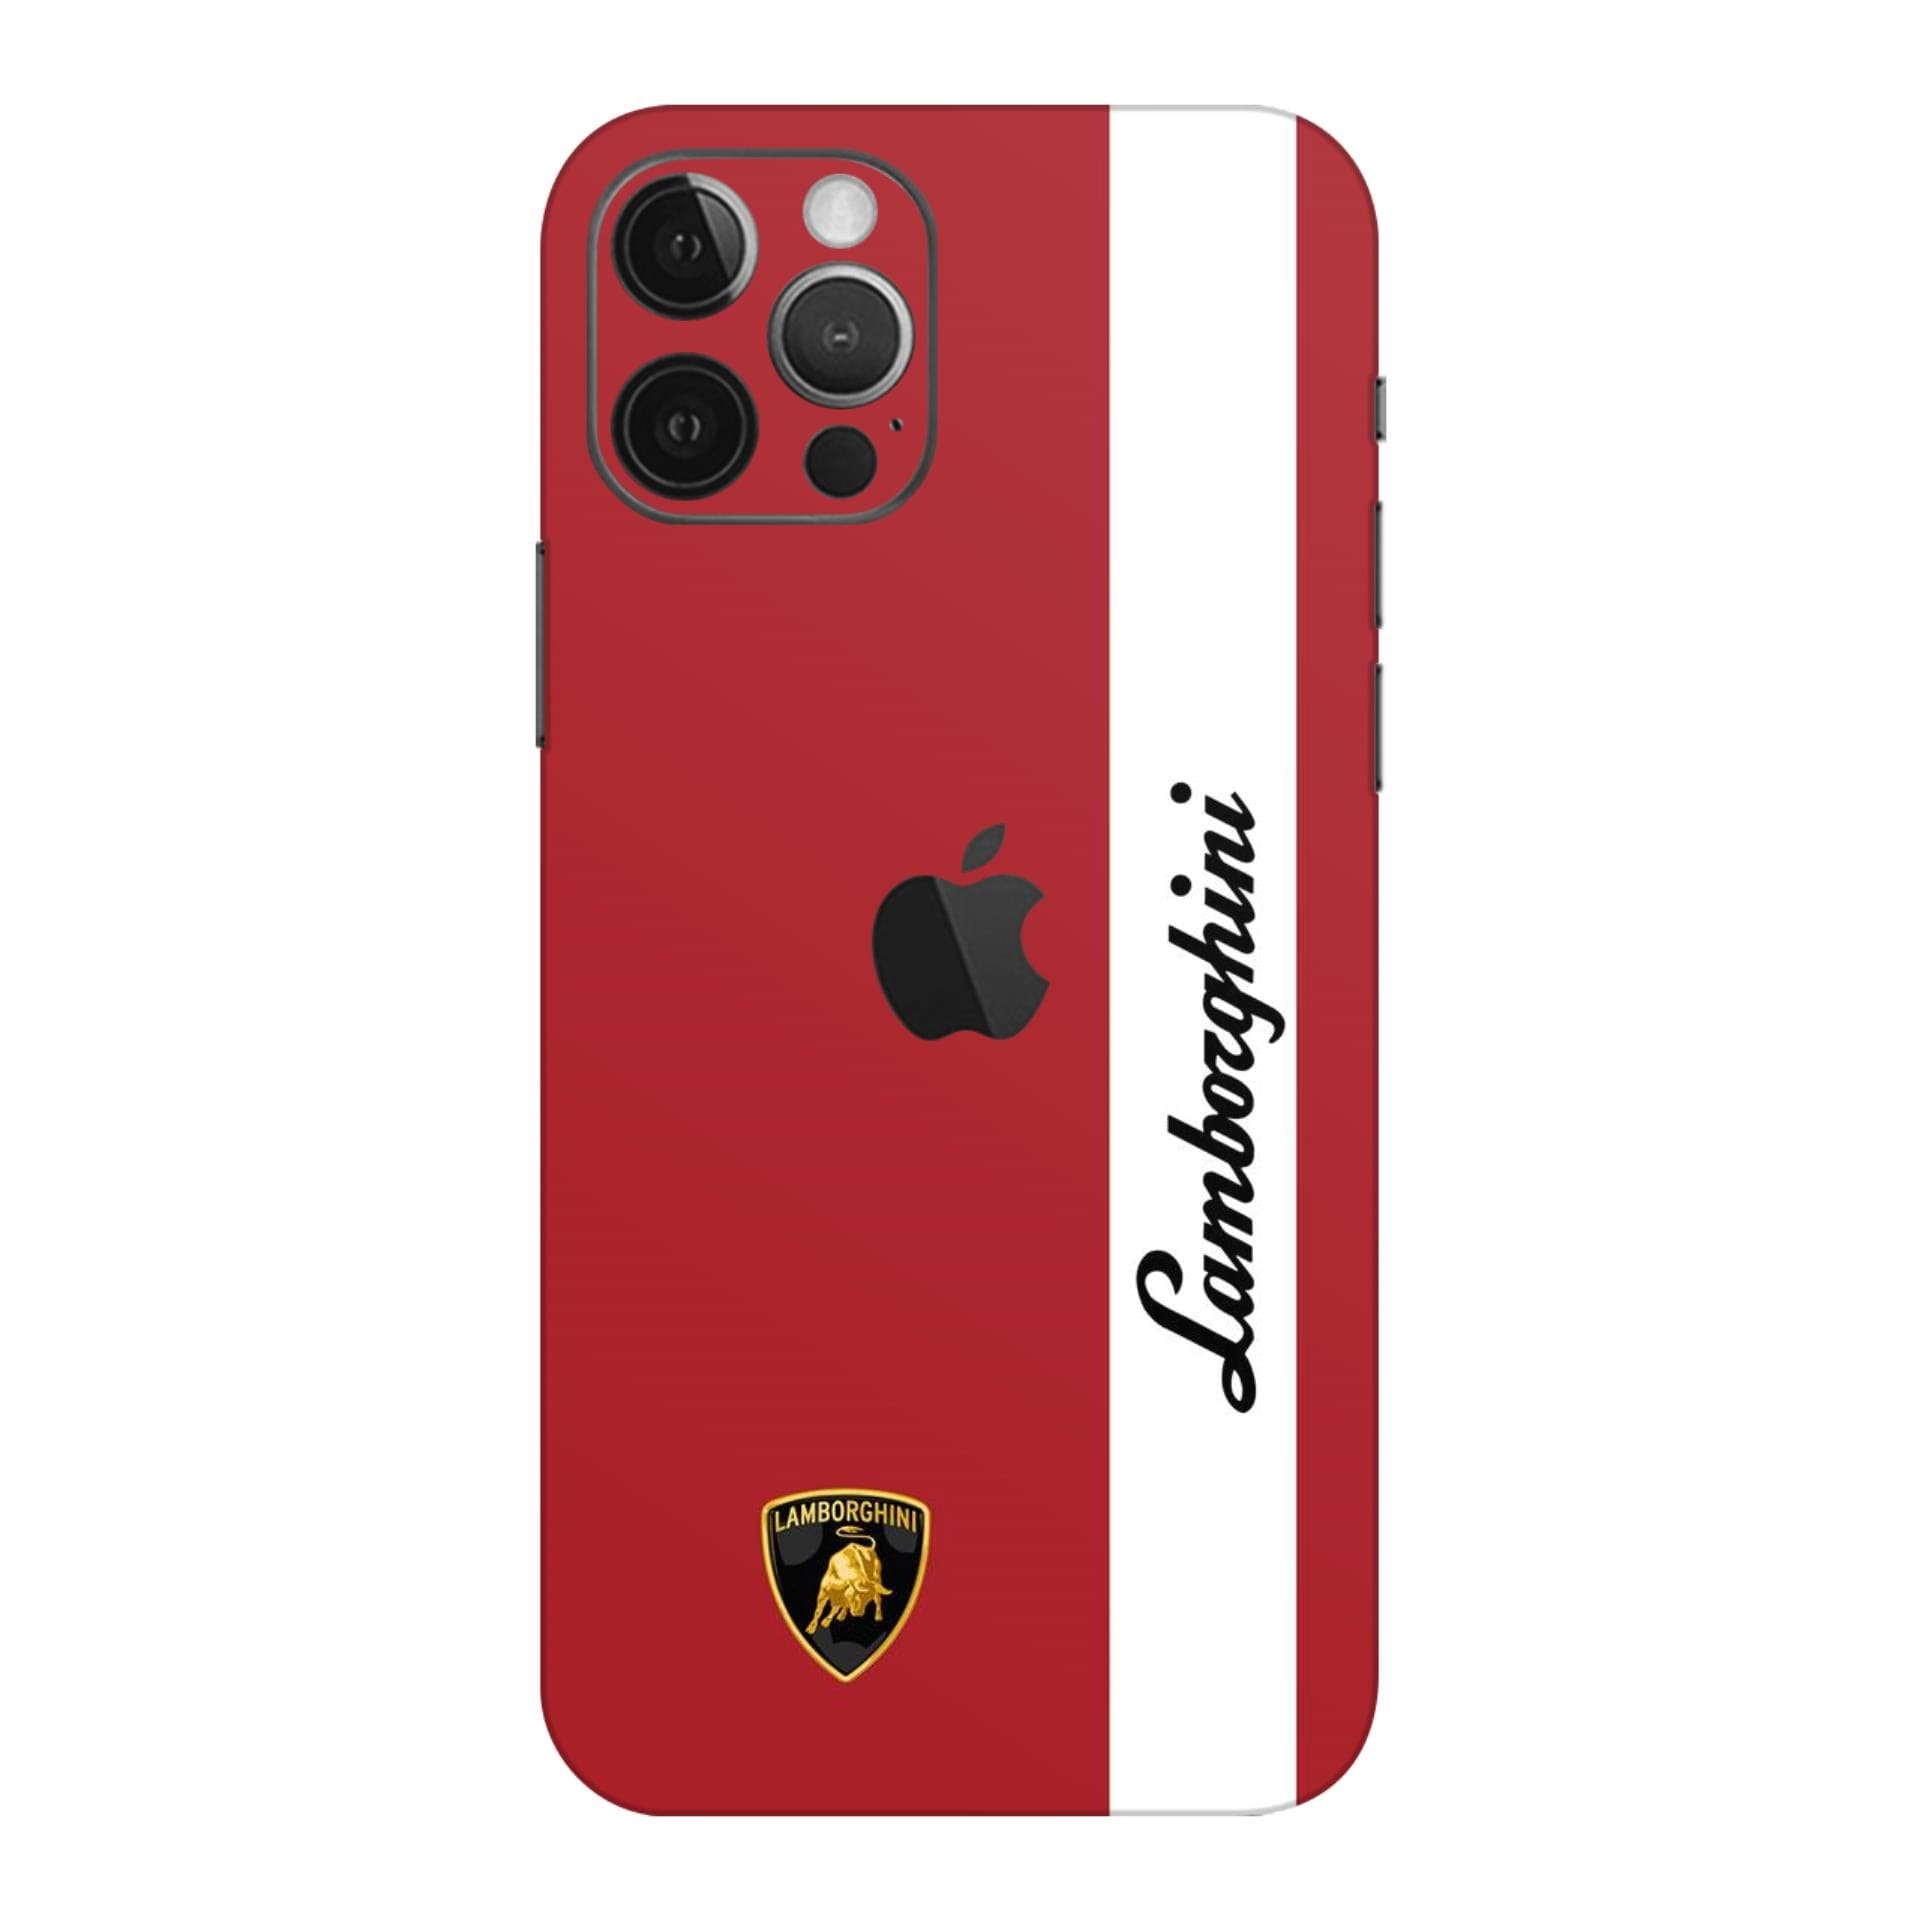 iphone 12 Pro Max Ruby Racer skins